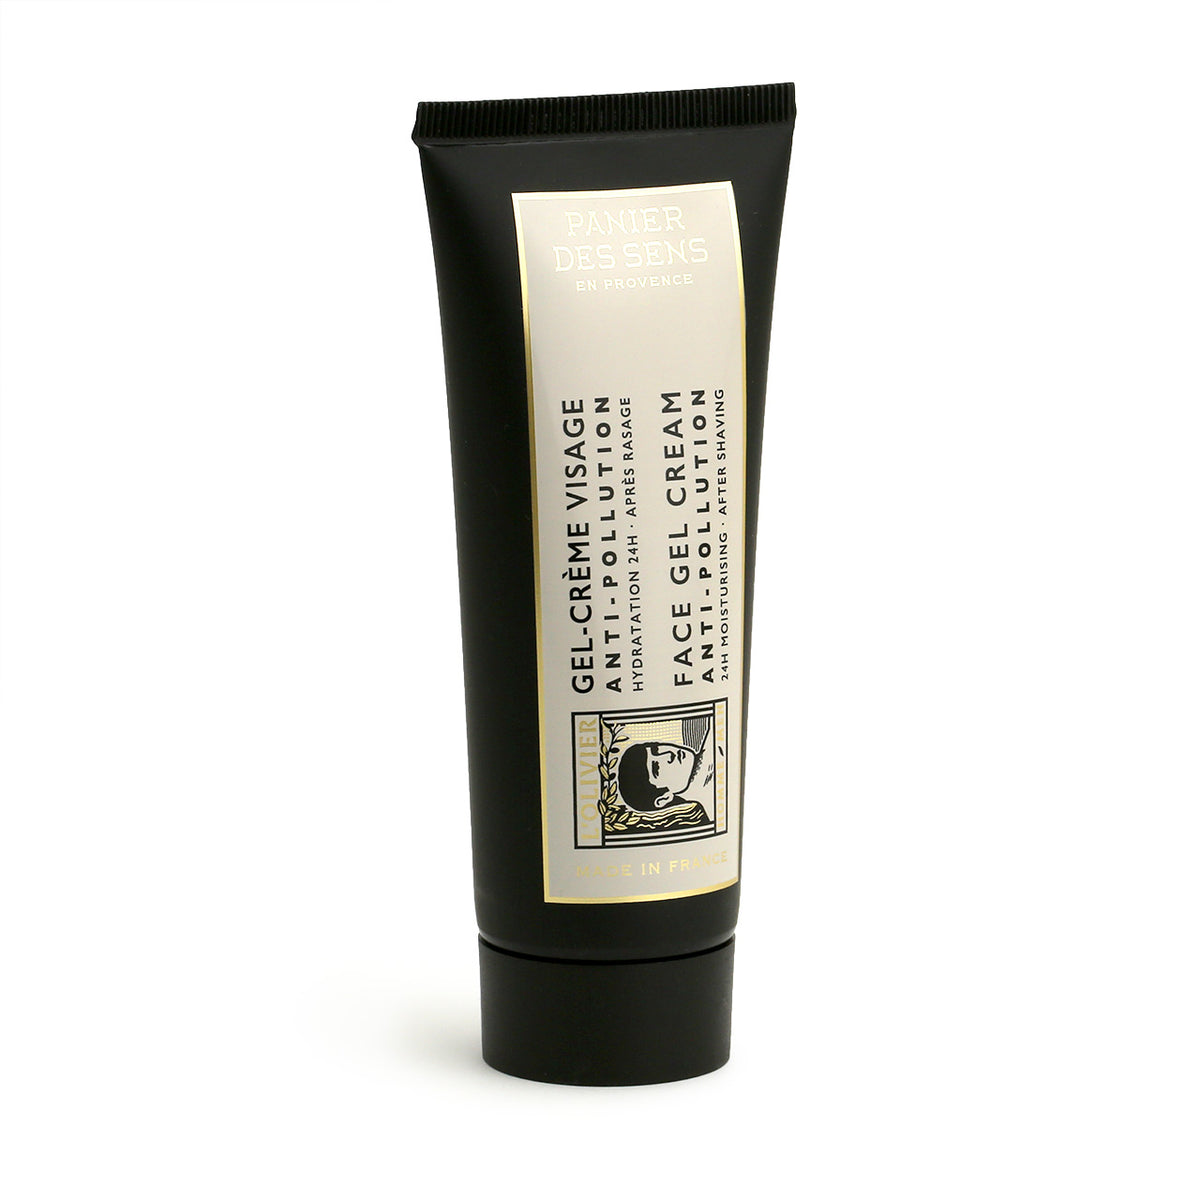 Face cream gel from Panier des Sens L&#39;Olivier Homme, black tupbe with cream, gold and black graphics